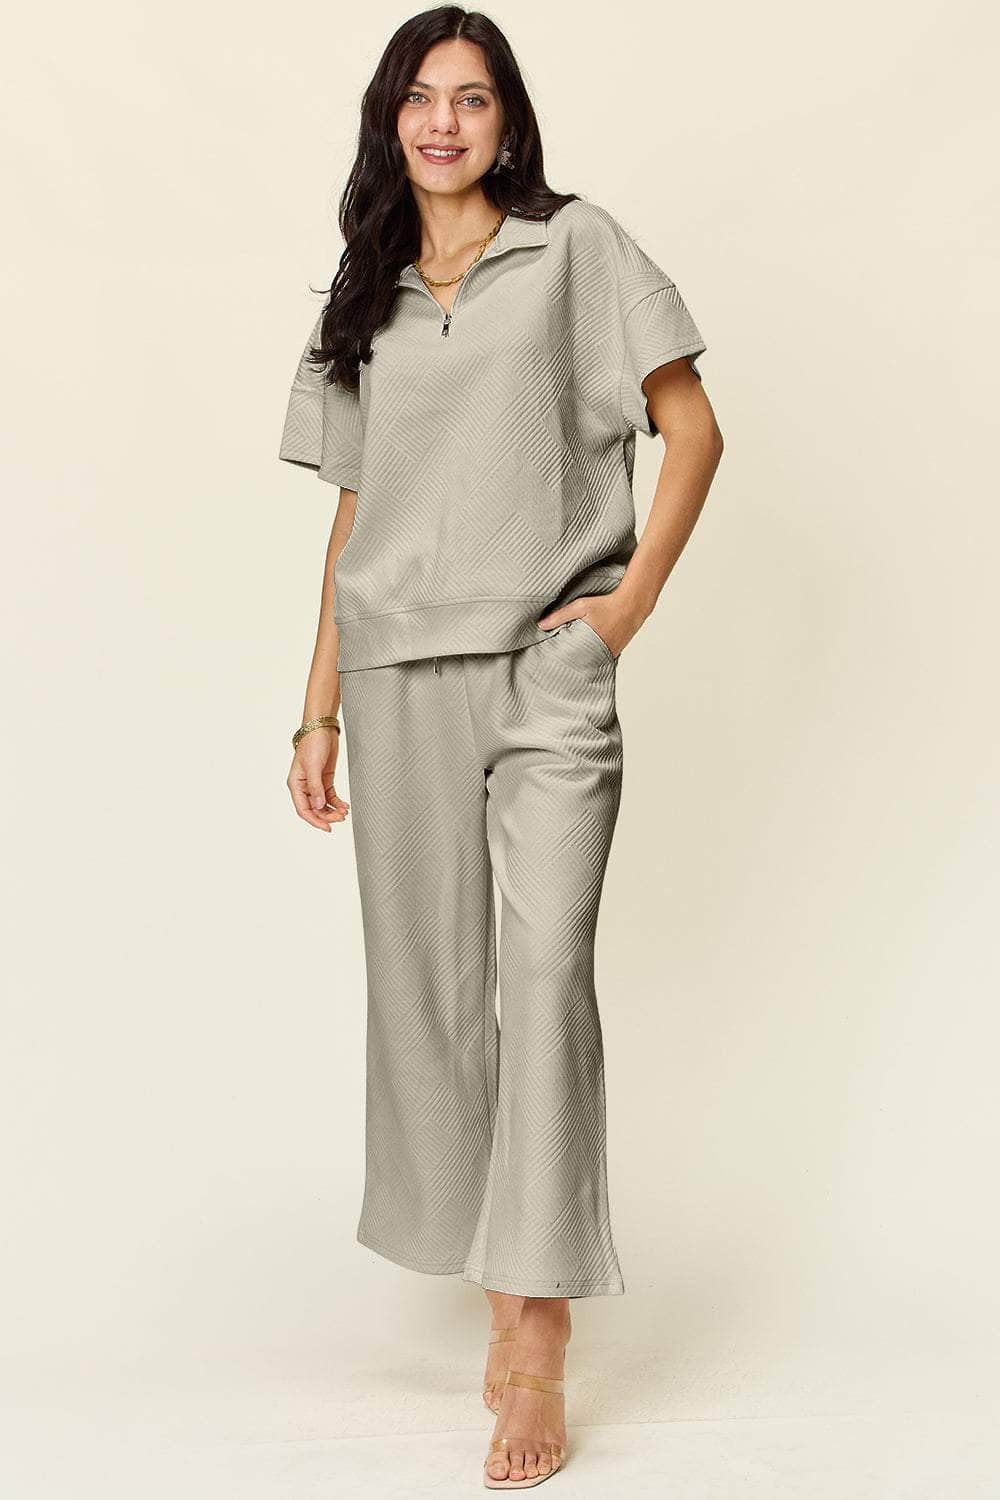 Double Take Full Size Texture Half Zip Short Sleeve Top and Pants Set Dust Storm / S